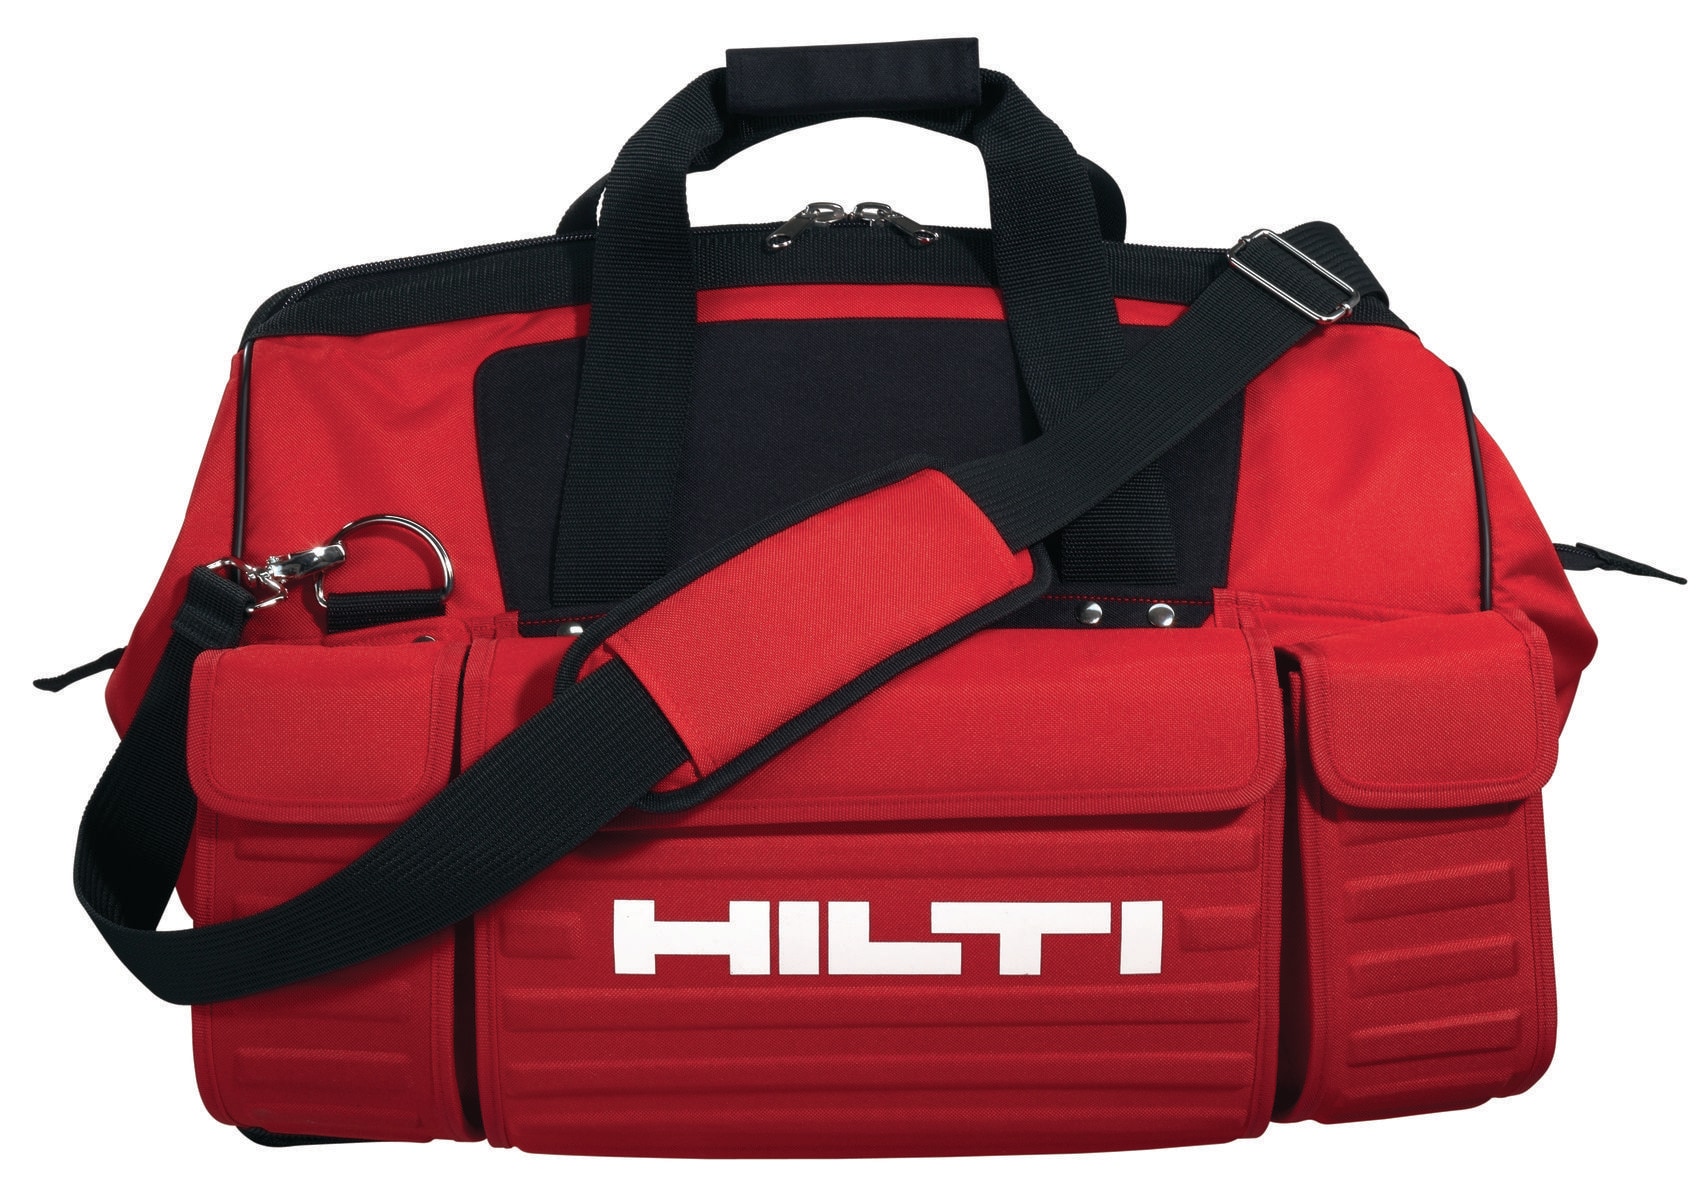 Hilti Large Hilti  Heavy Duty Contractor Tool Bag Case Used but in very good condition 